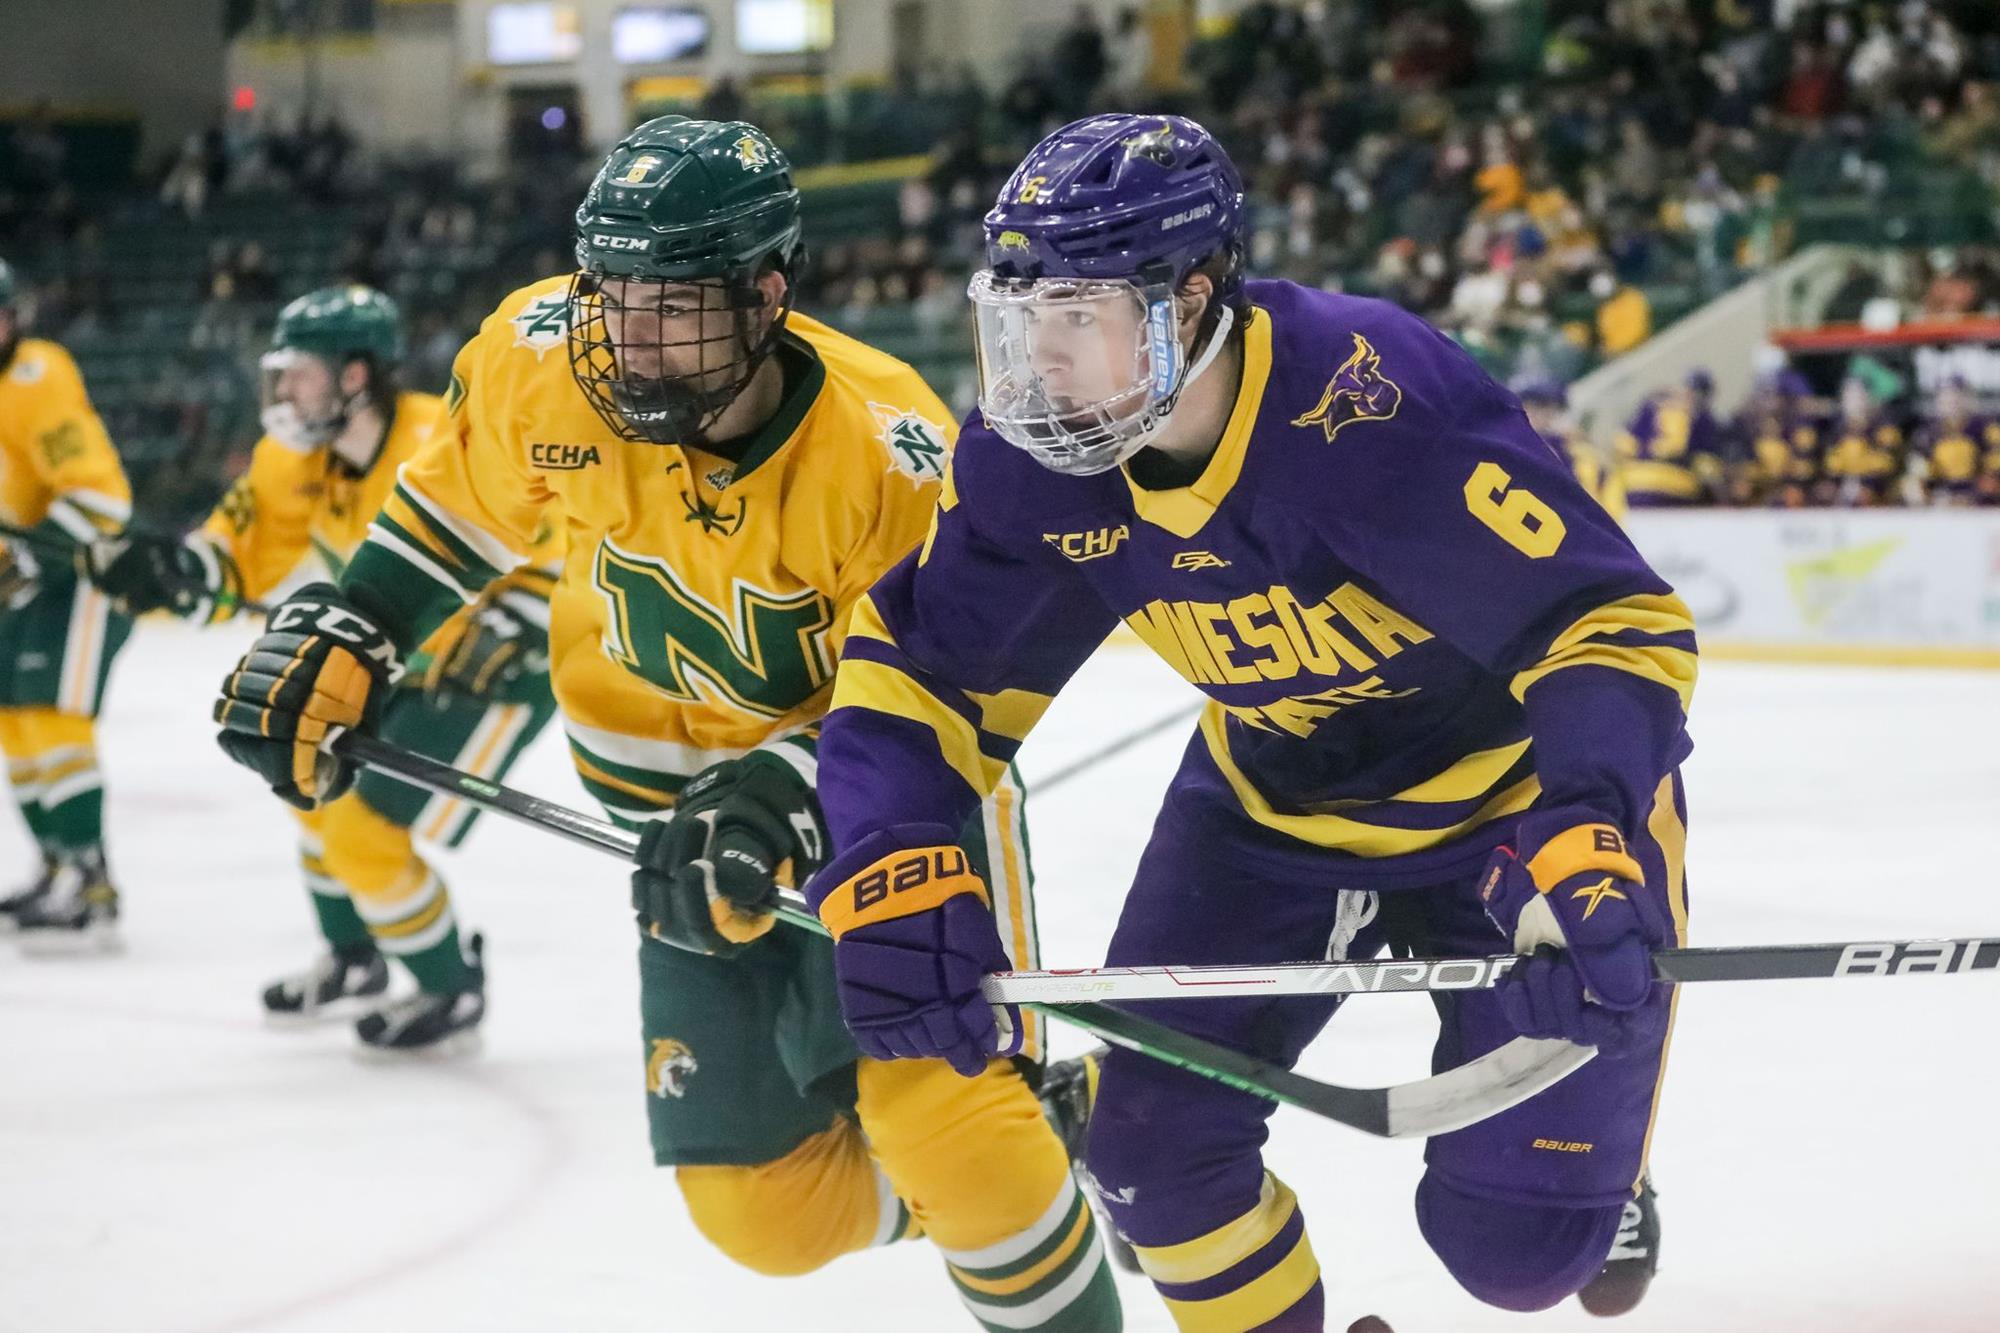 Starting with 2021-22 season, Mason Cup to be awarded to CCHA playoff  champion - College Hockey